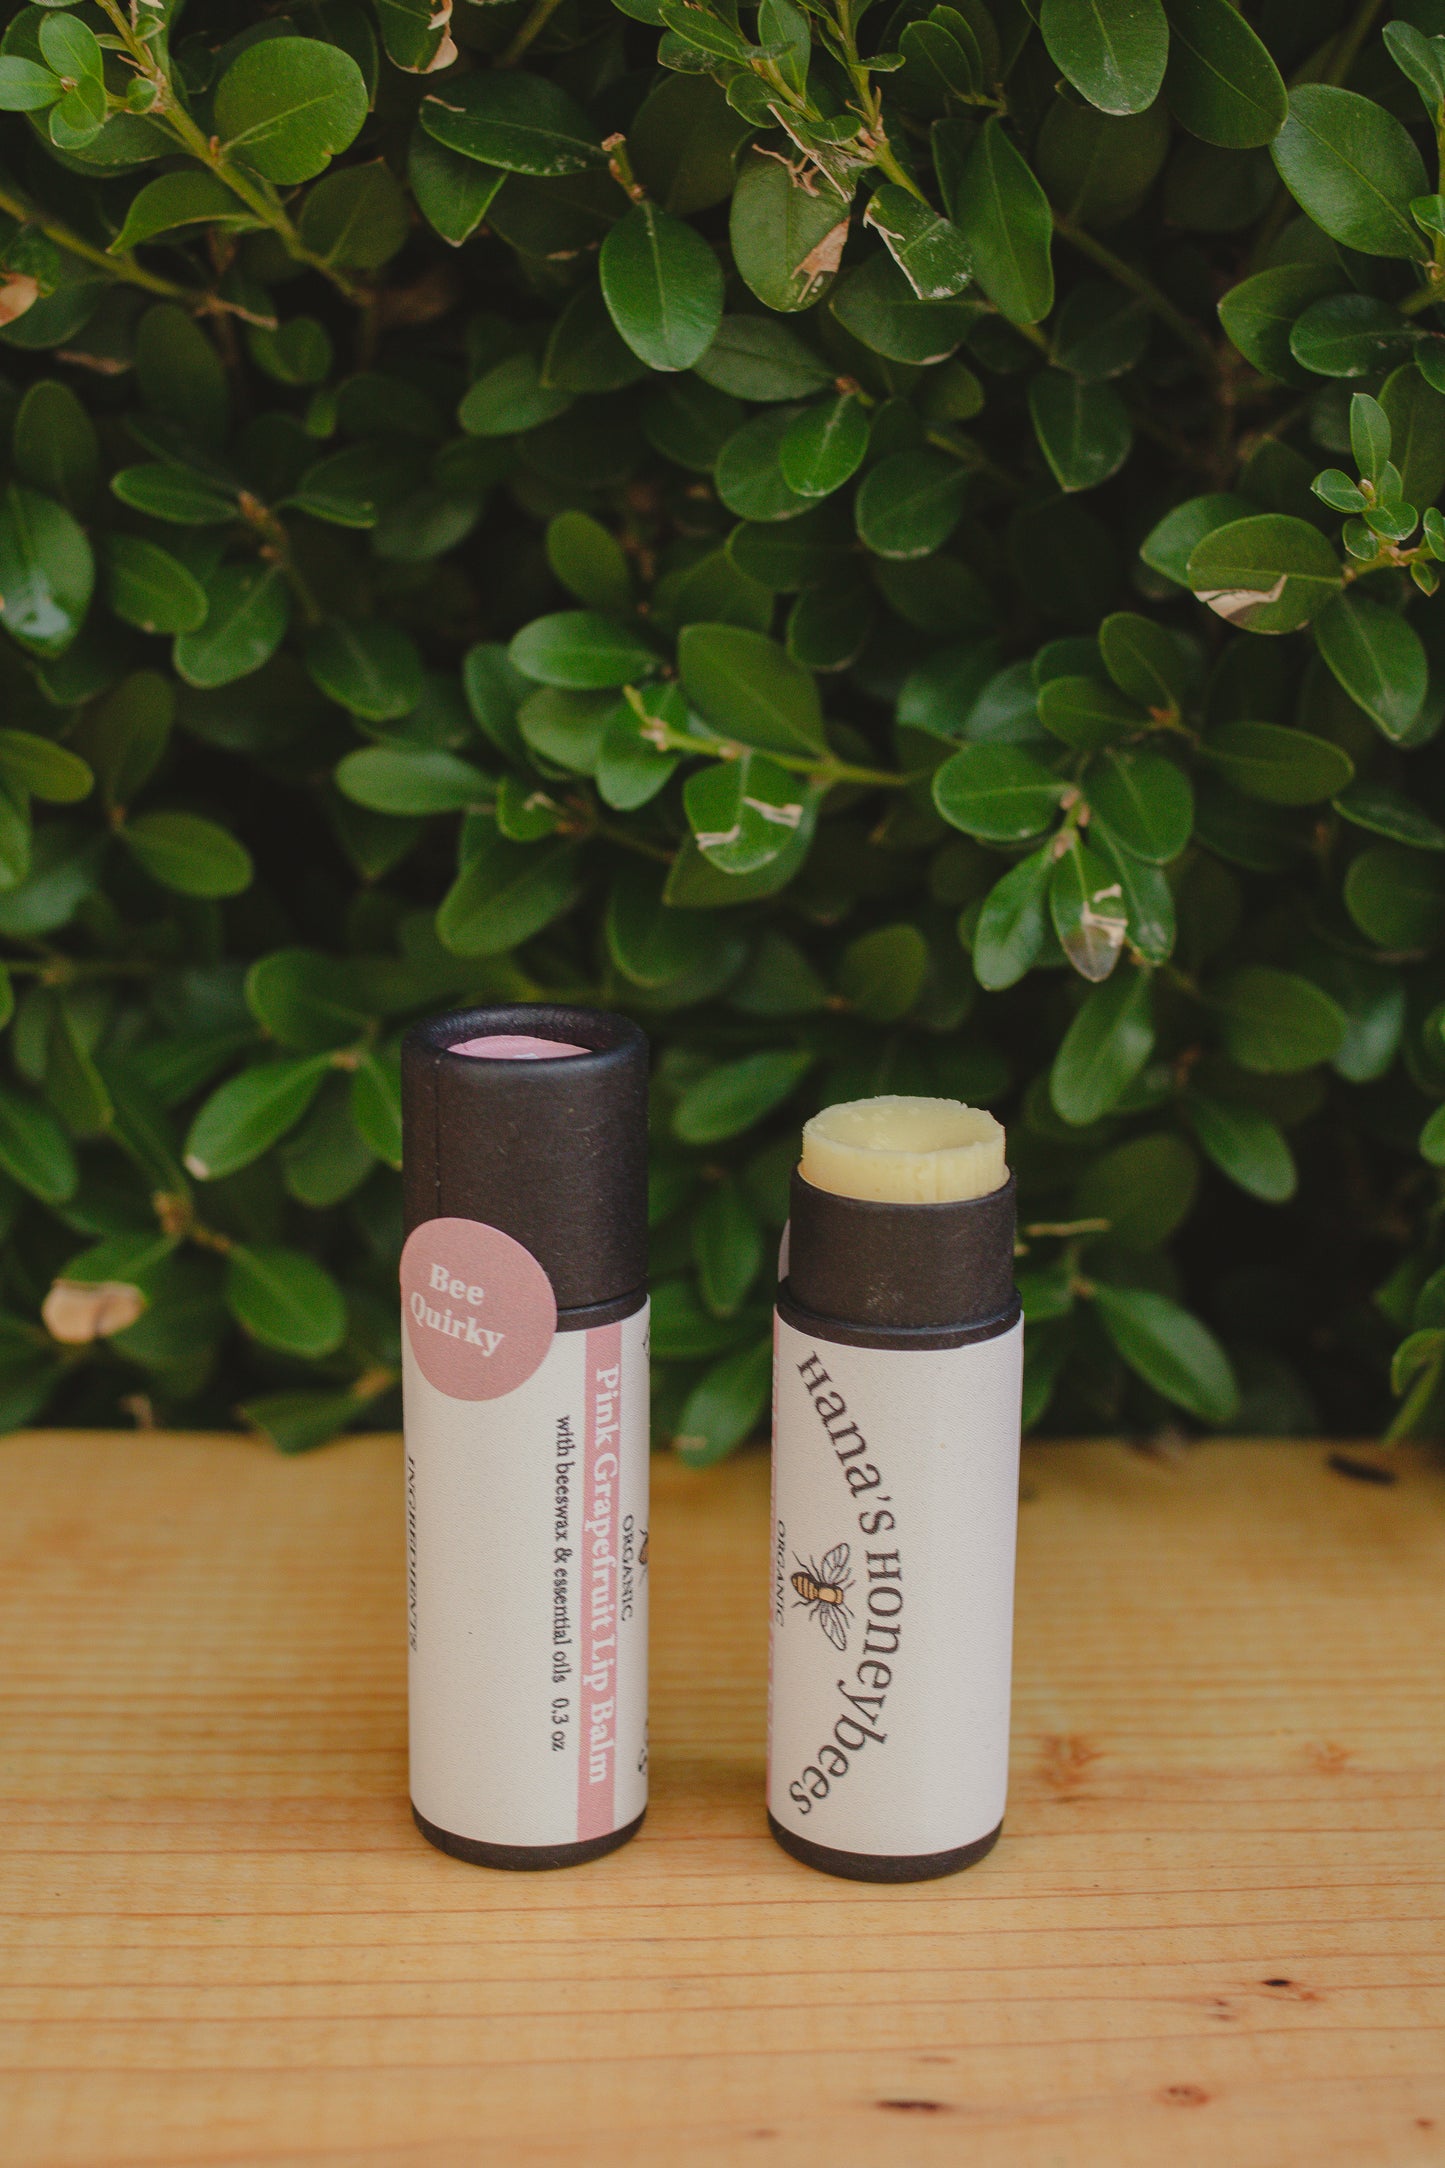 Eco-friendly Organic Pink Grapefruit Lip Balm Tube 0.3 oz, Cardboard Tube, Beeswax and Coconut Oil, Gifts, Essential Oils